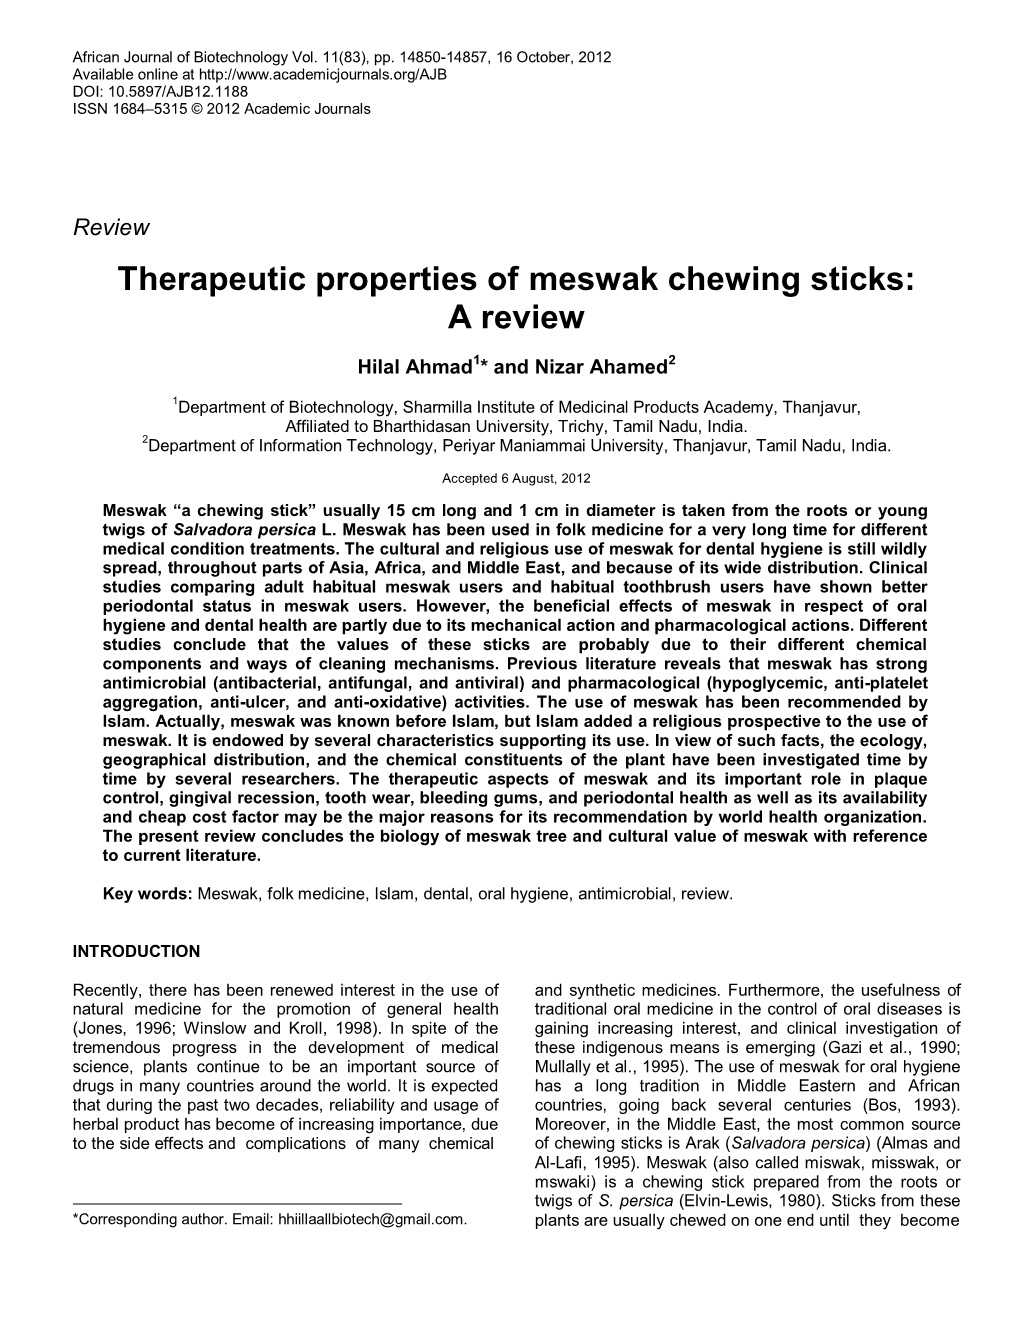 Therapeutic Properties of Meswak Chewing Sticks: a Review